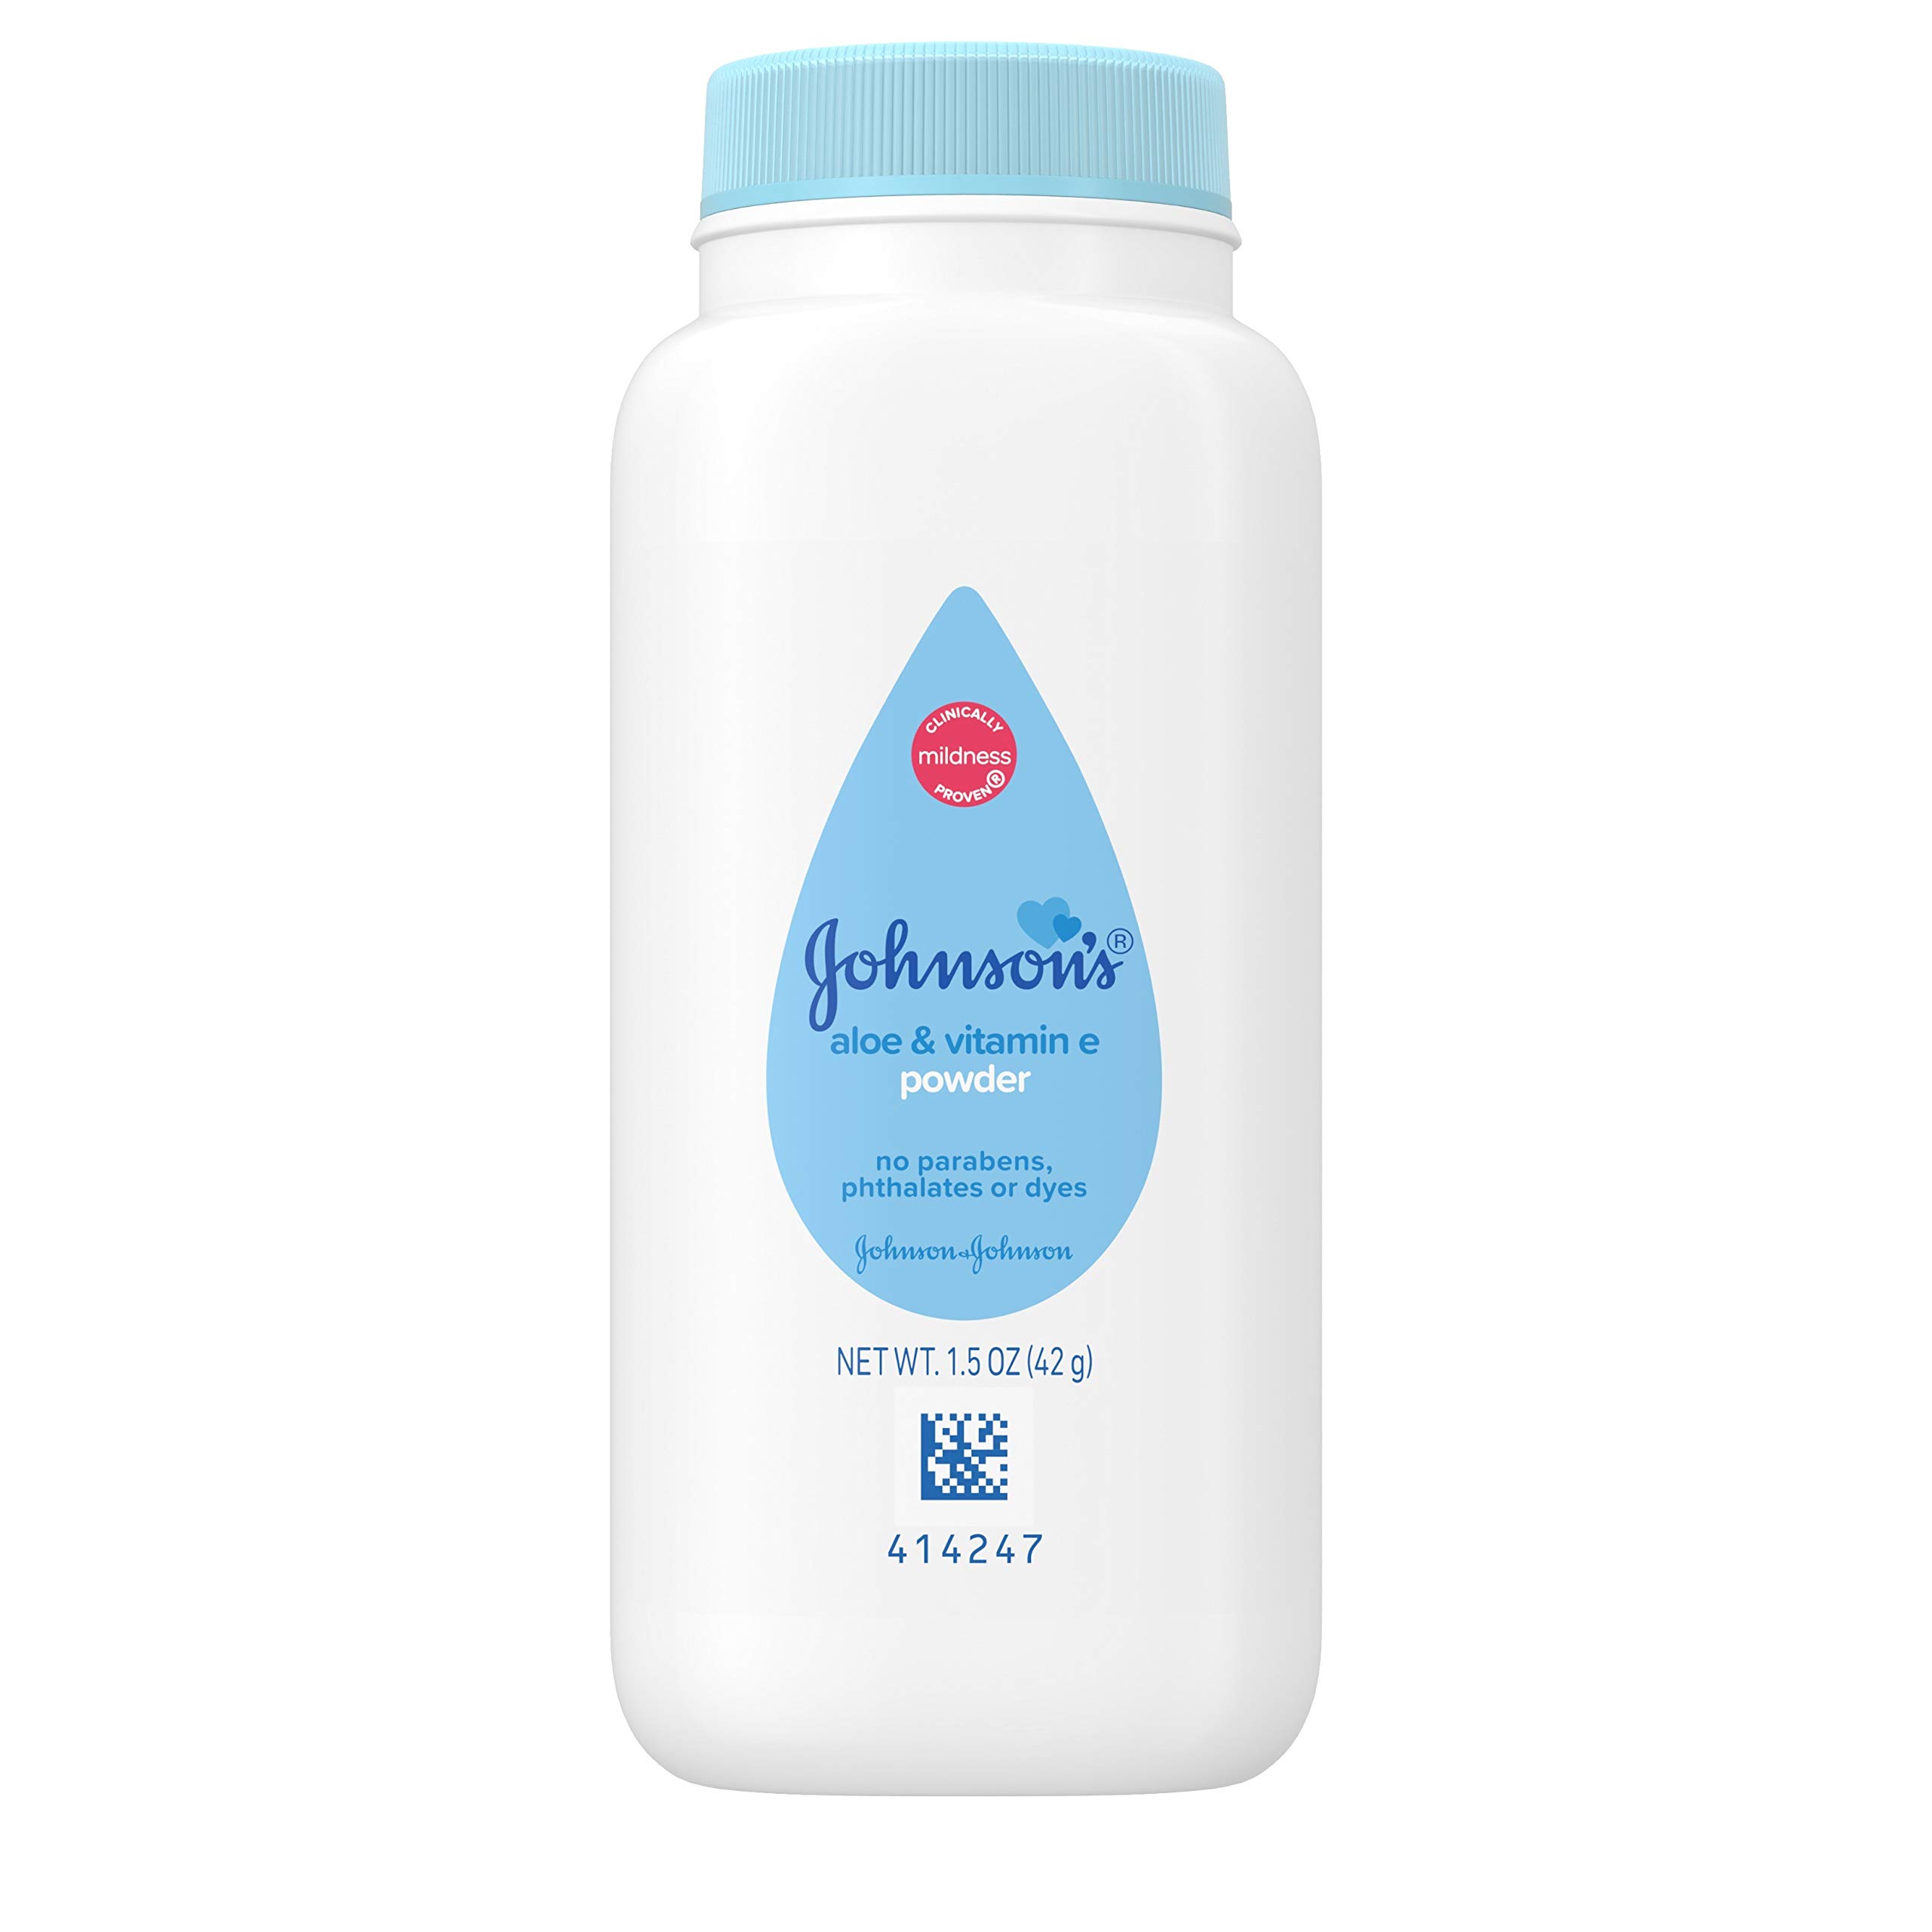 Johnson's Baby Naturally Derived Cornstarch Baby Powder with Aloe and Vitamin E for Delicate Skin, Hypoallergenic and Free of Parabens, Phthalates, $1.62